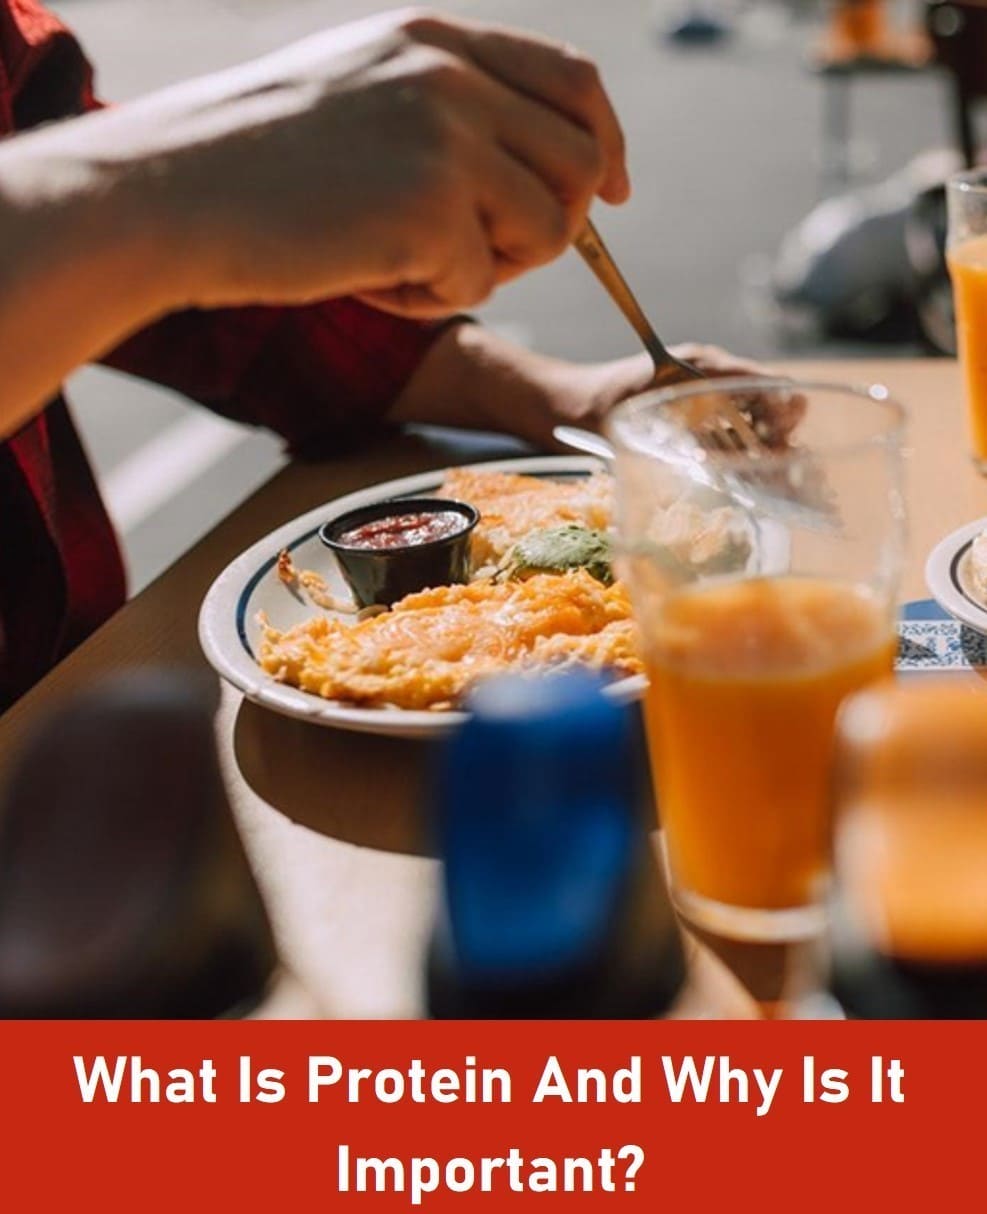 What Is Protein And Why Is It Important?